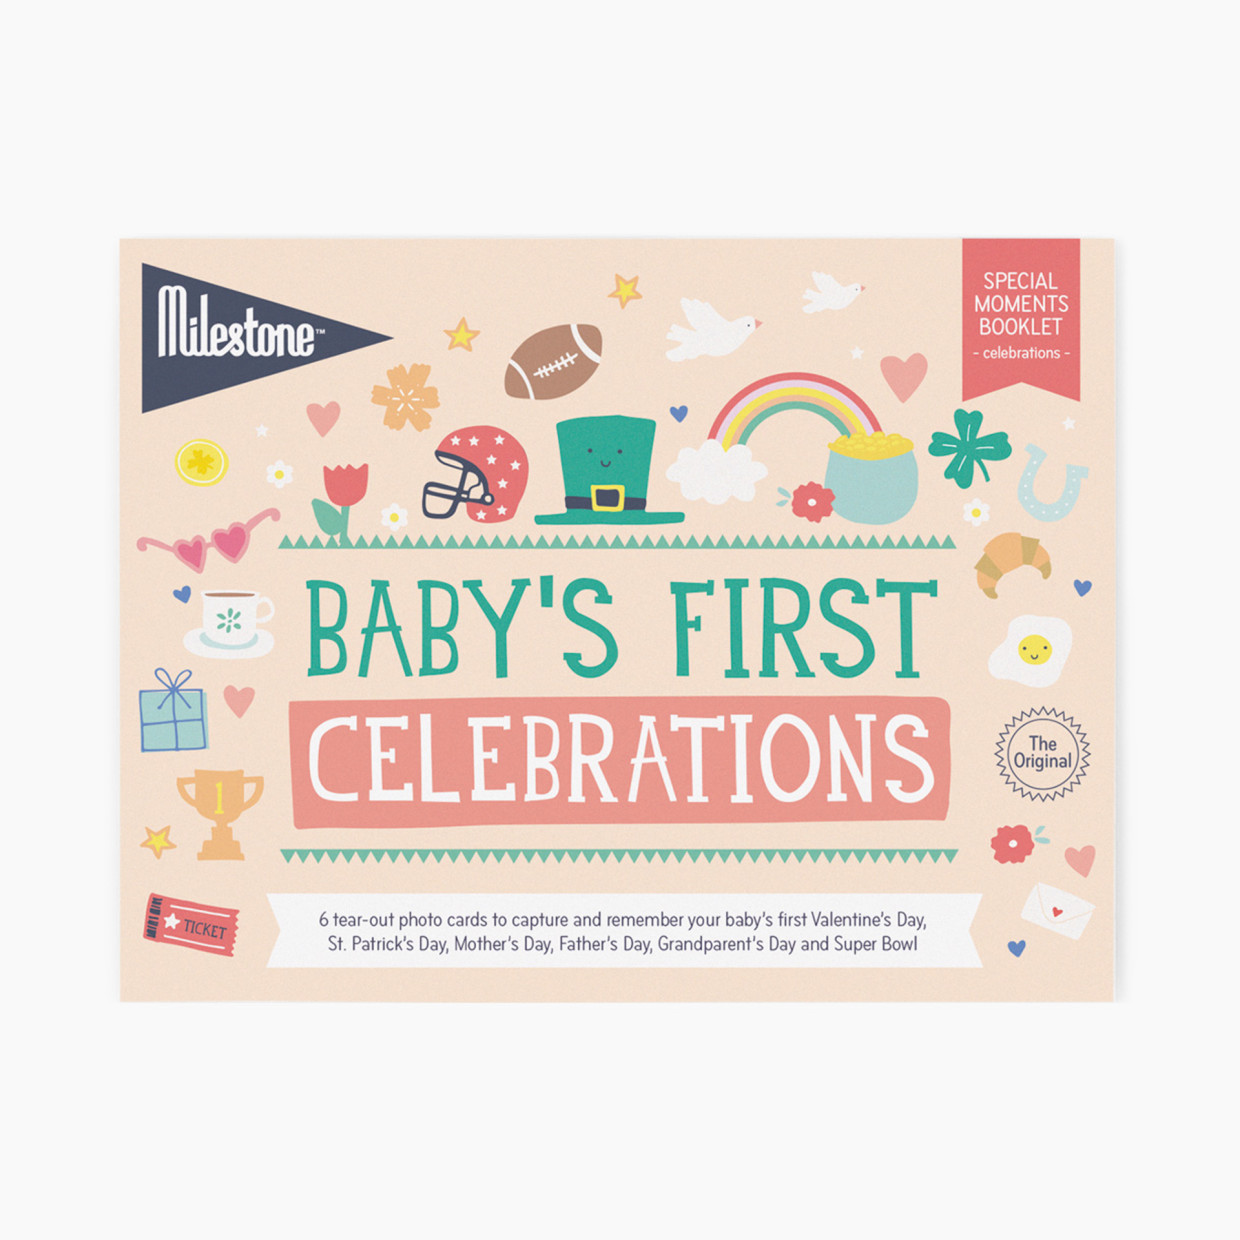 Milestone Baby's First Celebrations Photo Card Booklet.